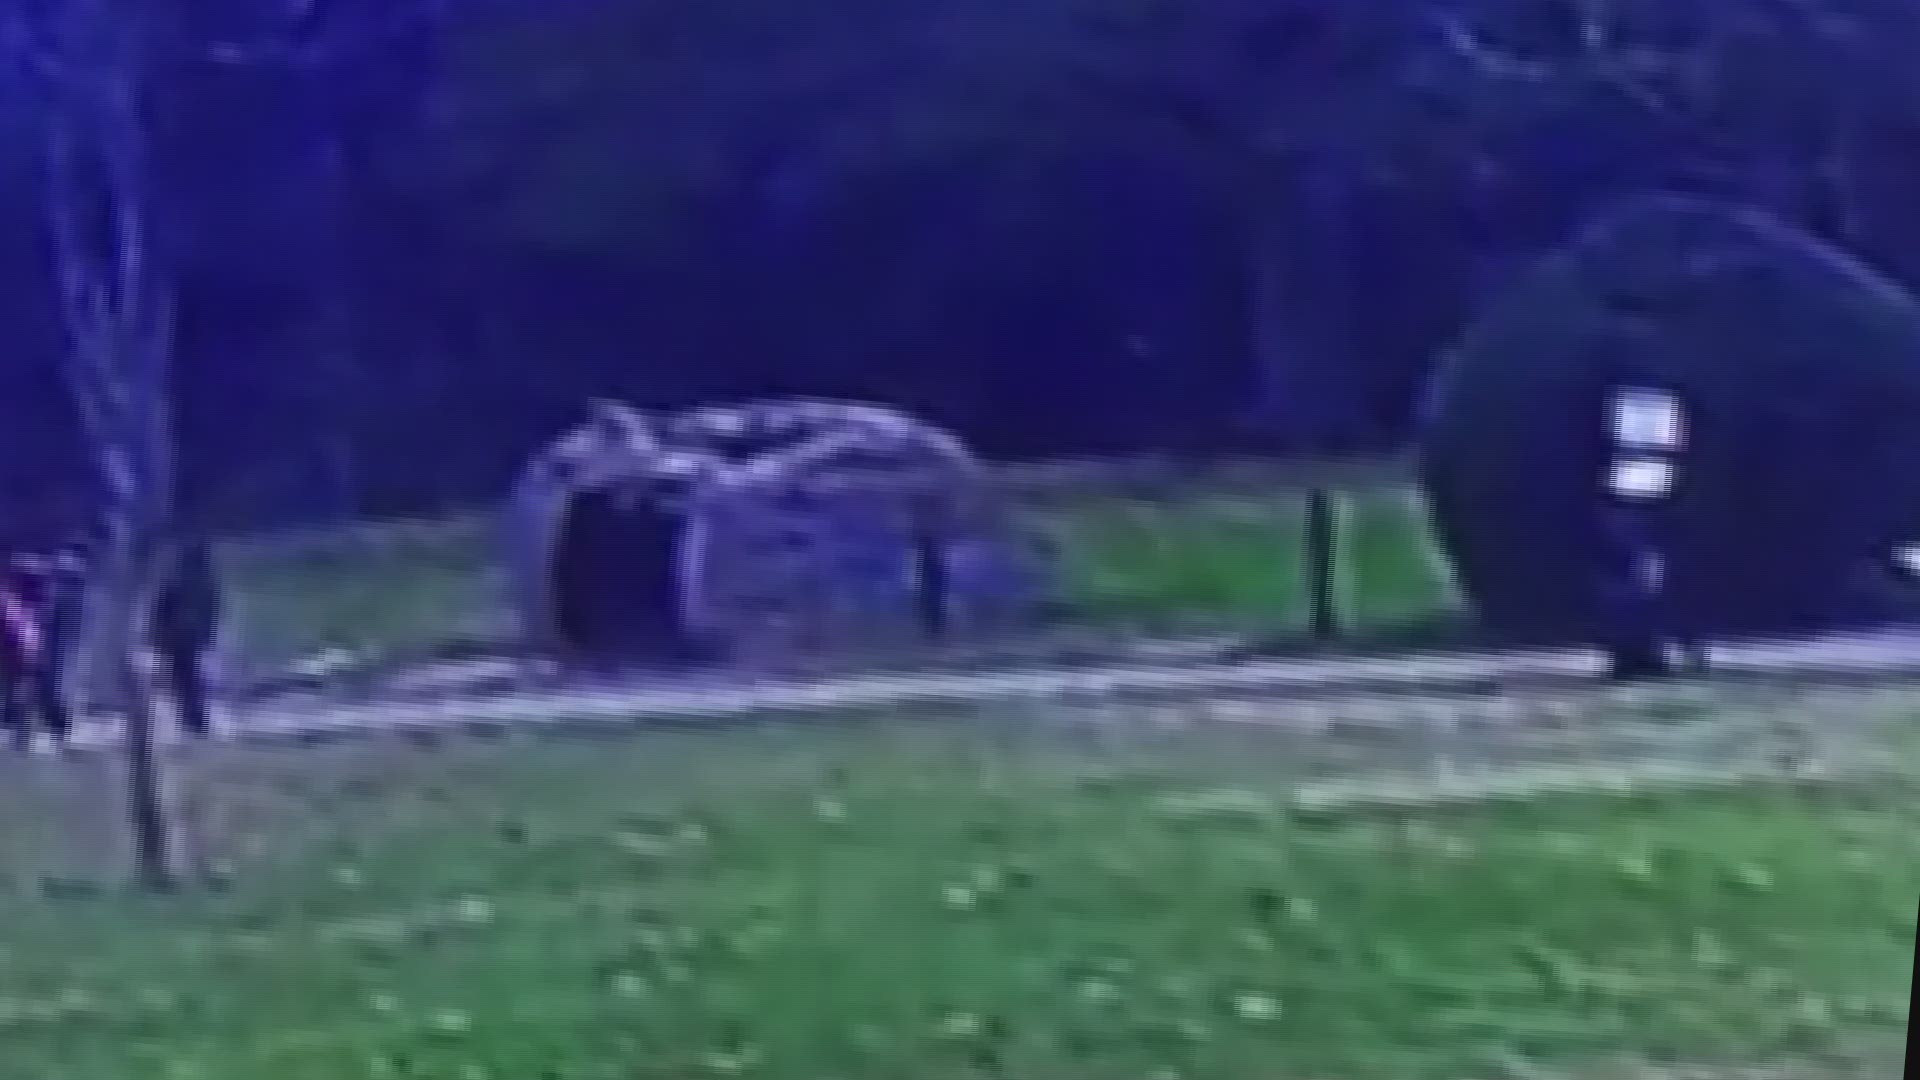 Surveillance footage from the Ocmulgee National Monument shows a group of vandals attacking the Woodland-style house and one of them even body slams it